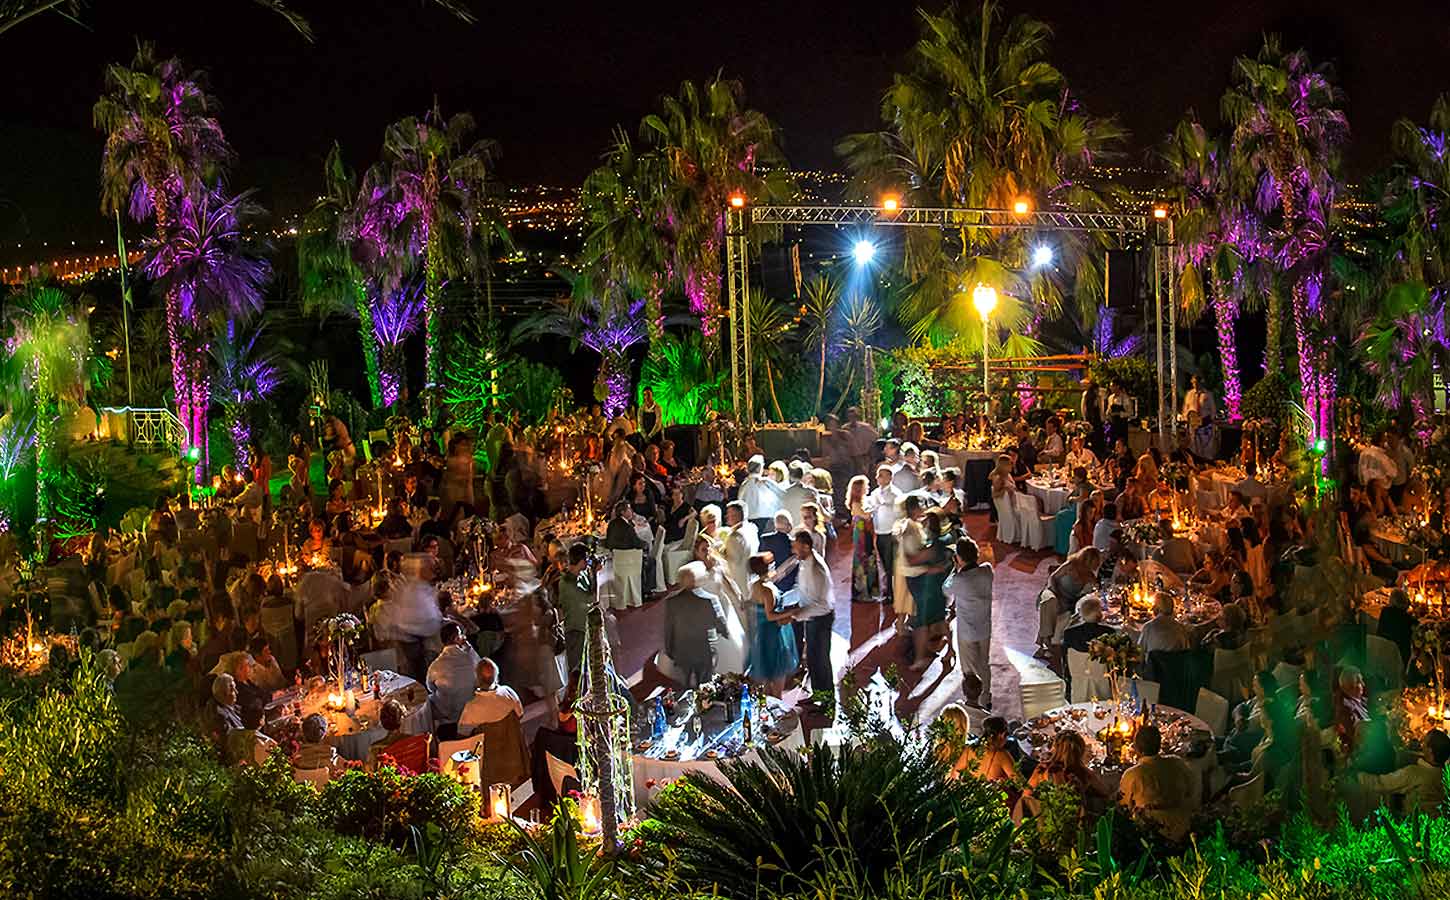 dance-party-at-a-wedding-with-diamond-events-planning-company-services-in-greece